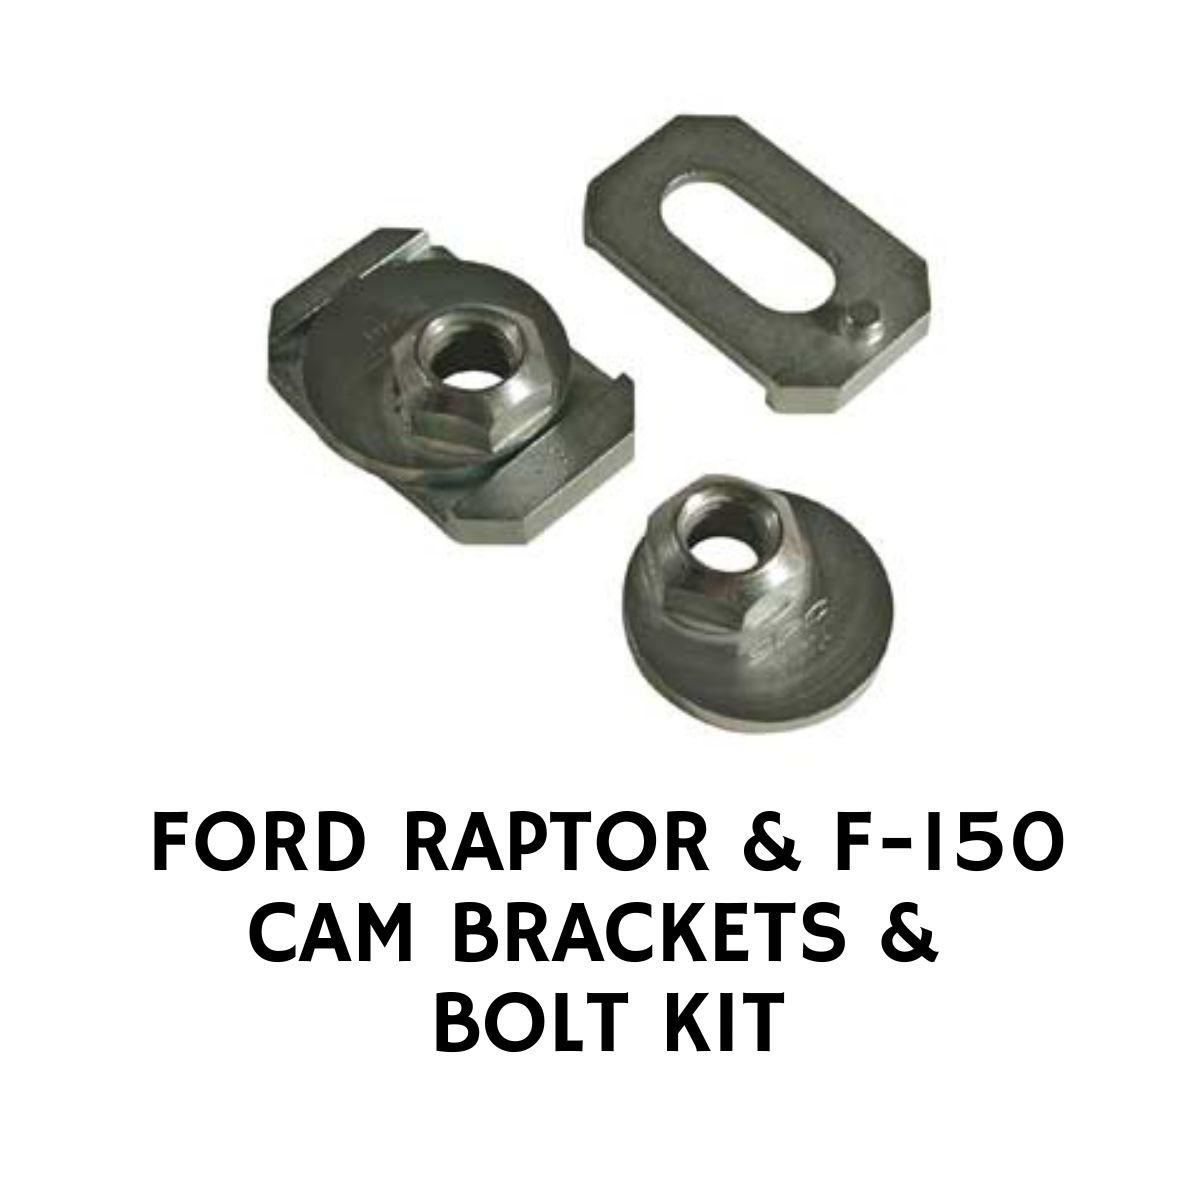 FORD RAPTOR AND F-150 CAM BRACKETS AND BOLT KIT